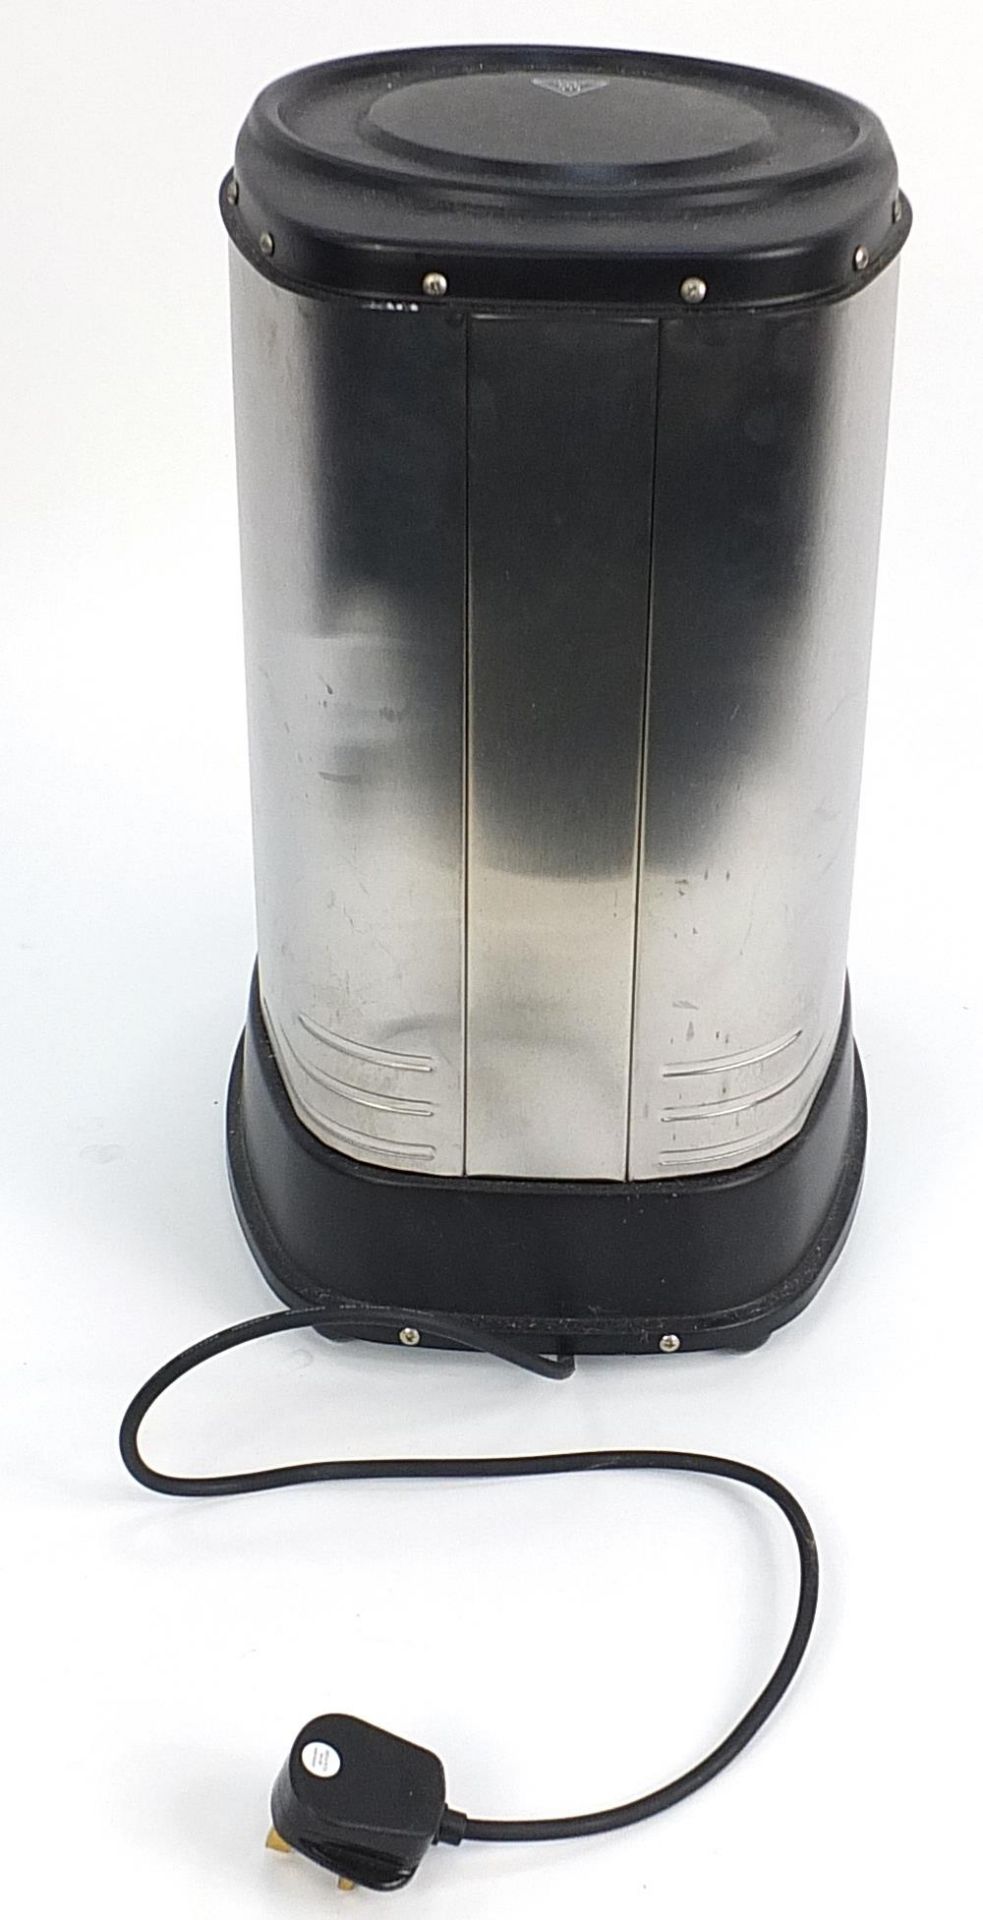 Quest electric kebab machine, 46cm high - Image 2 of 2